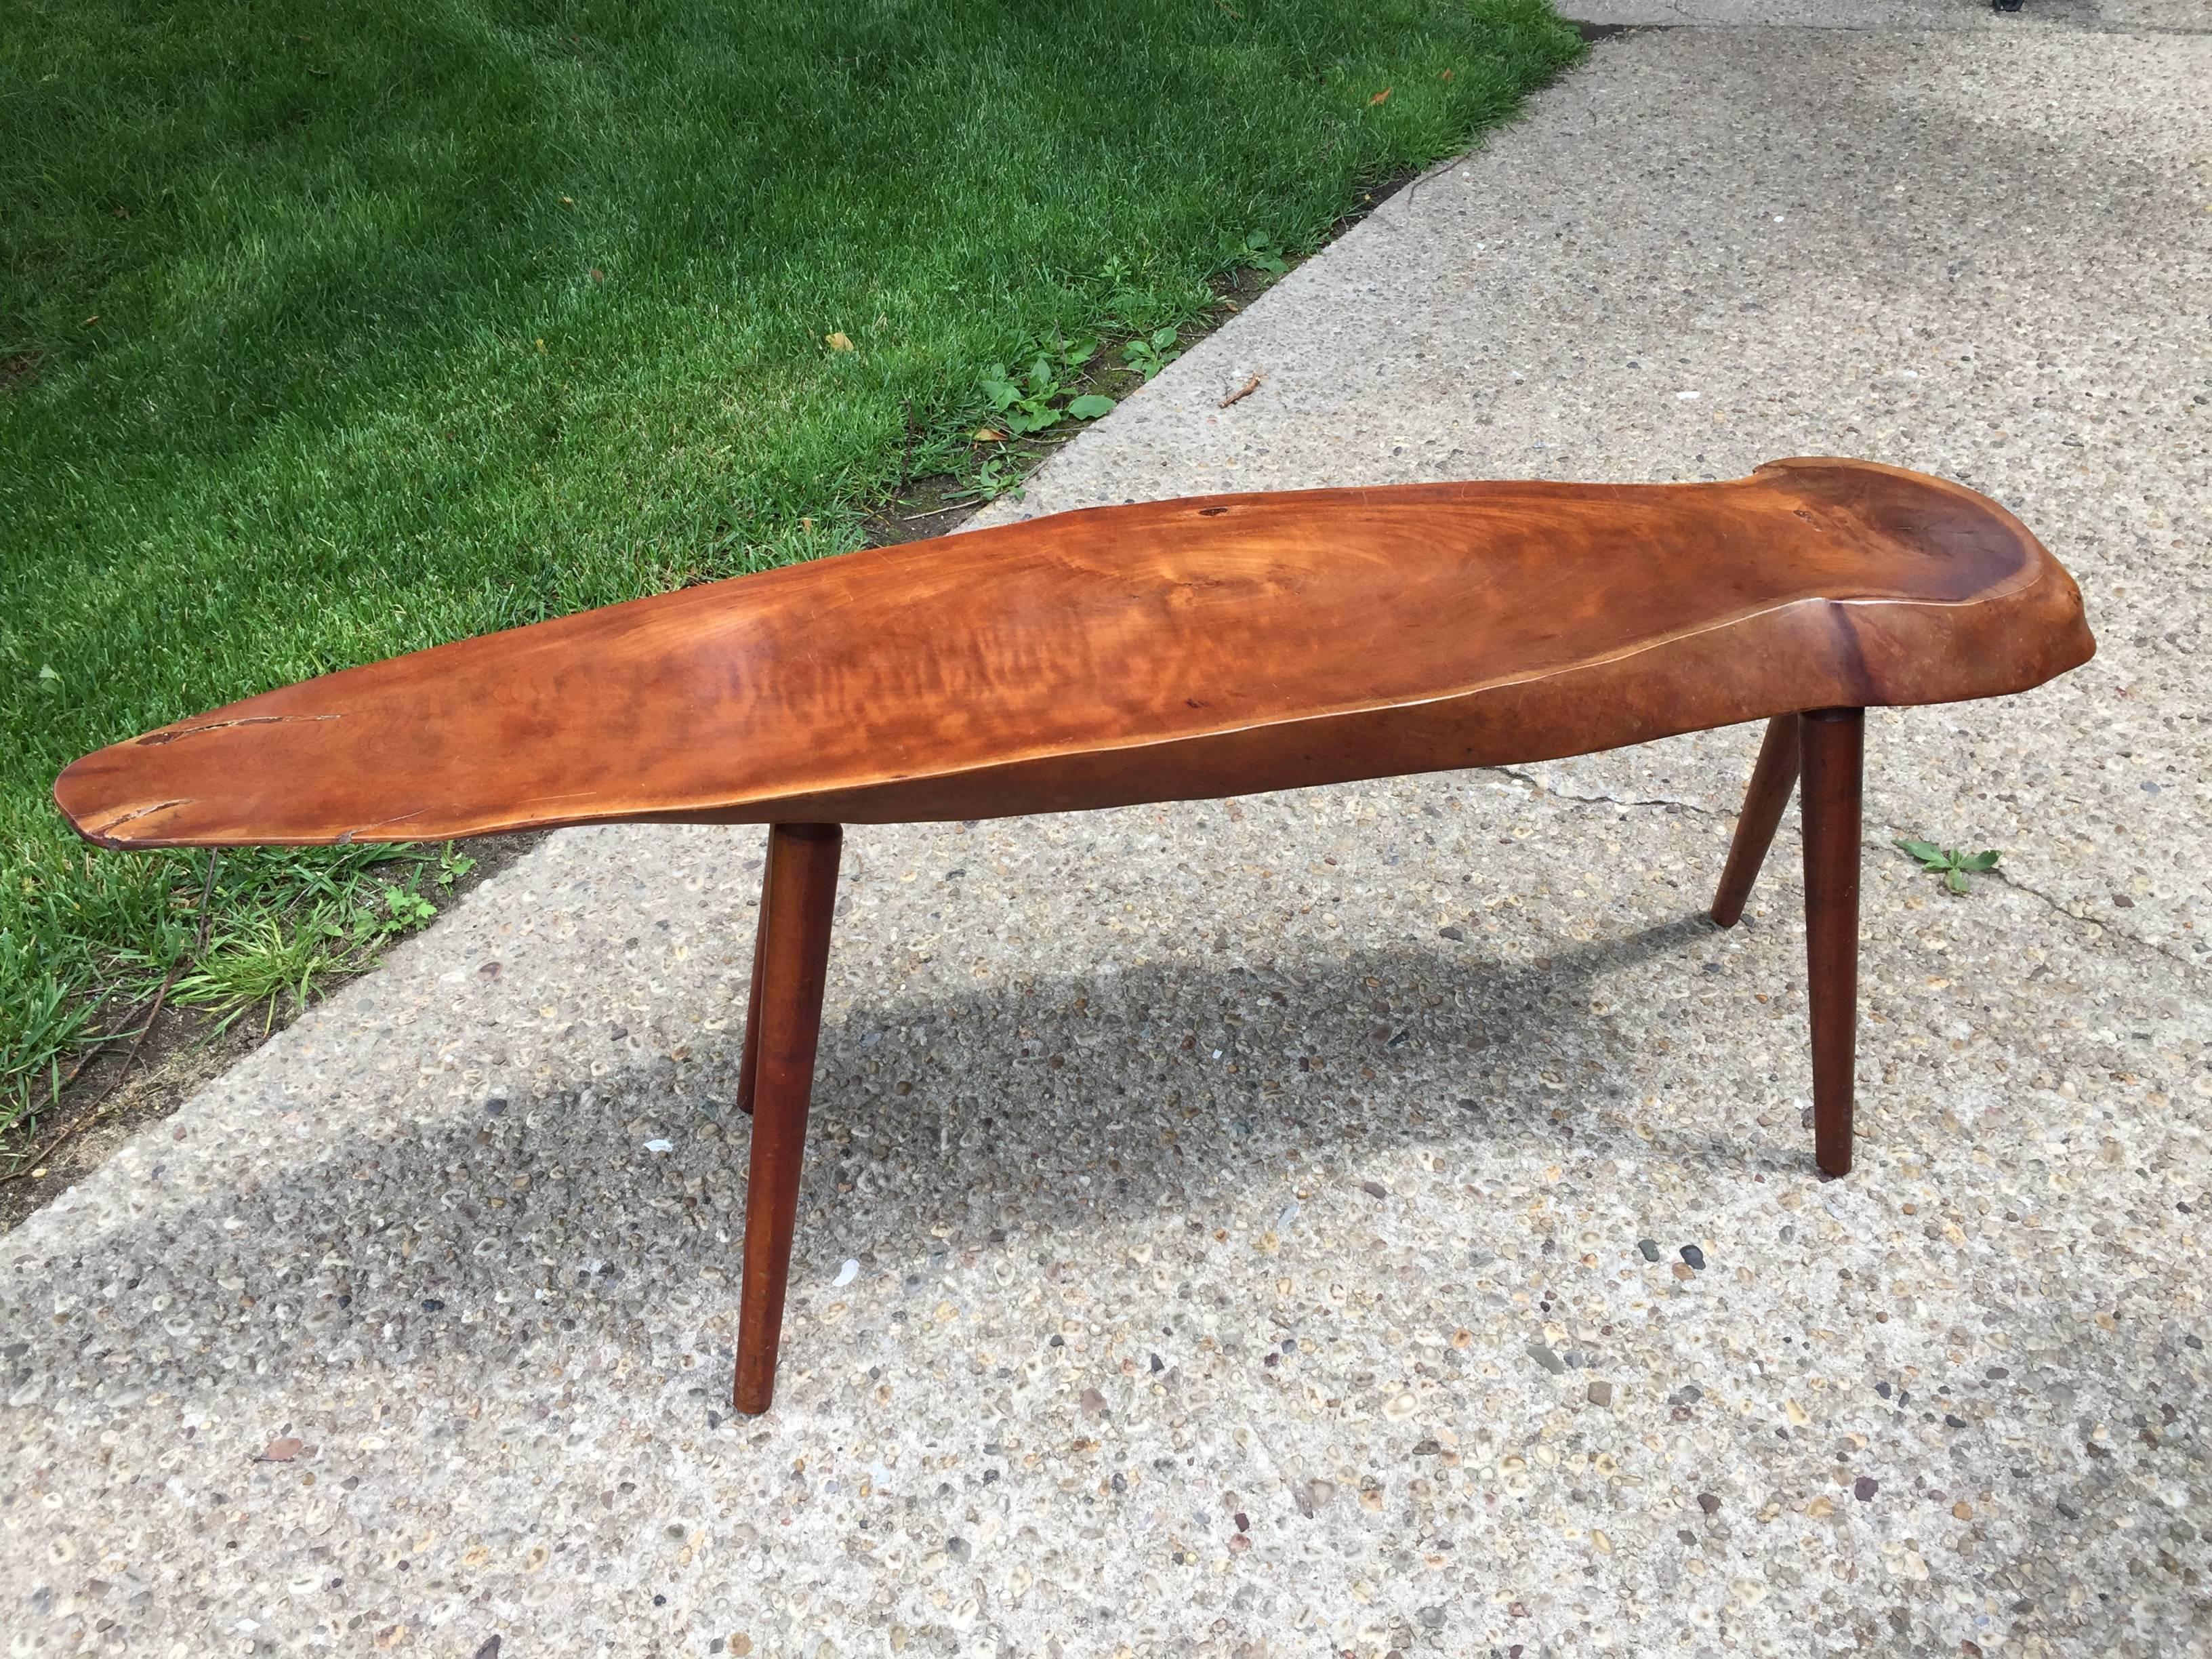 Natural black cherry and signed to underside, this natural wood specimen is very clean and sturdy. Original legs and well crafted. In the family of George Nakashima's finely crafted natural wood creations.